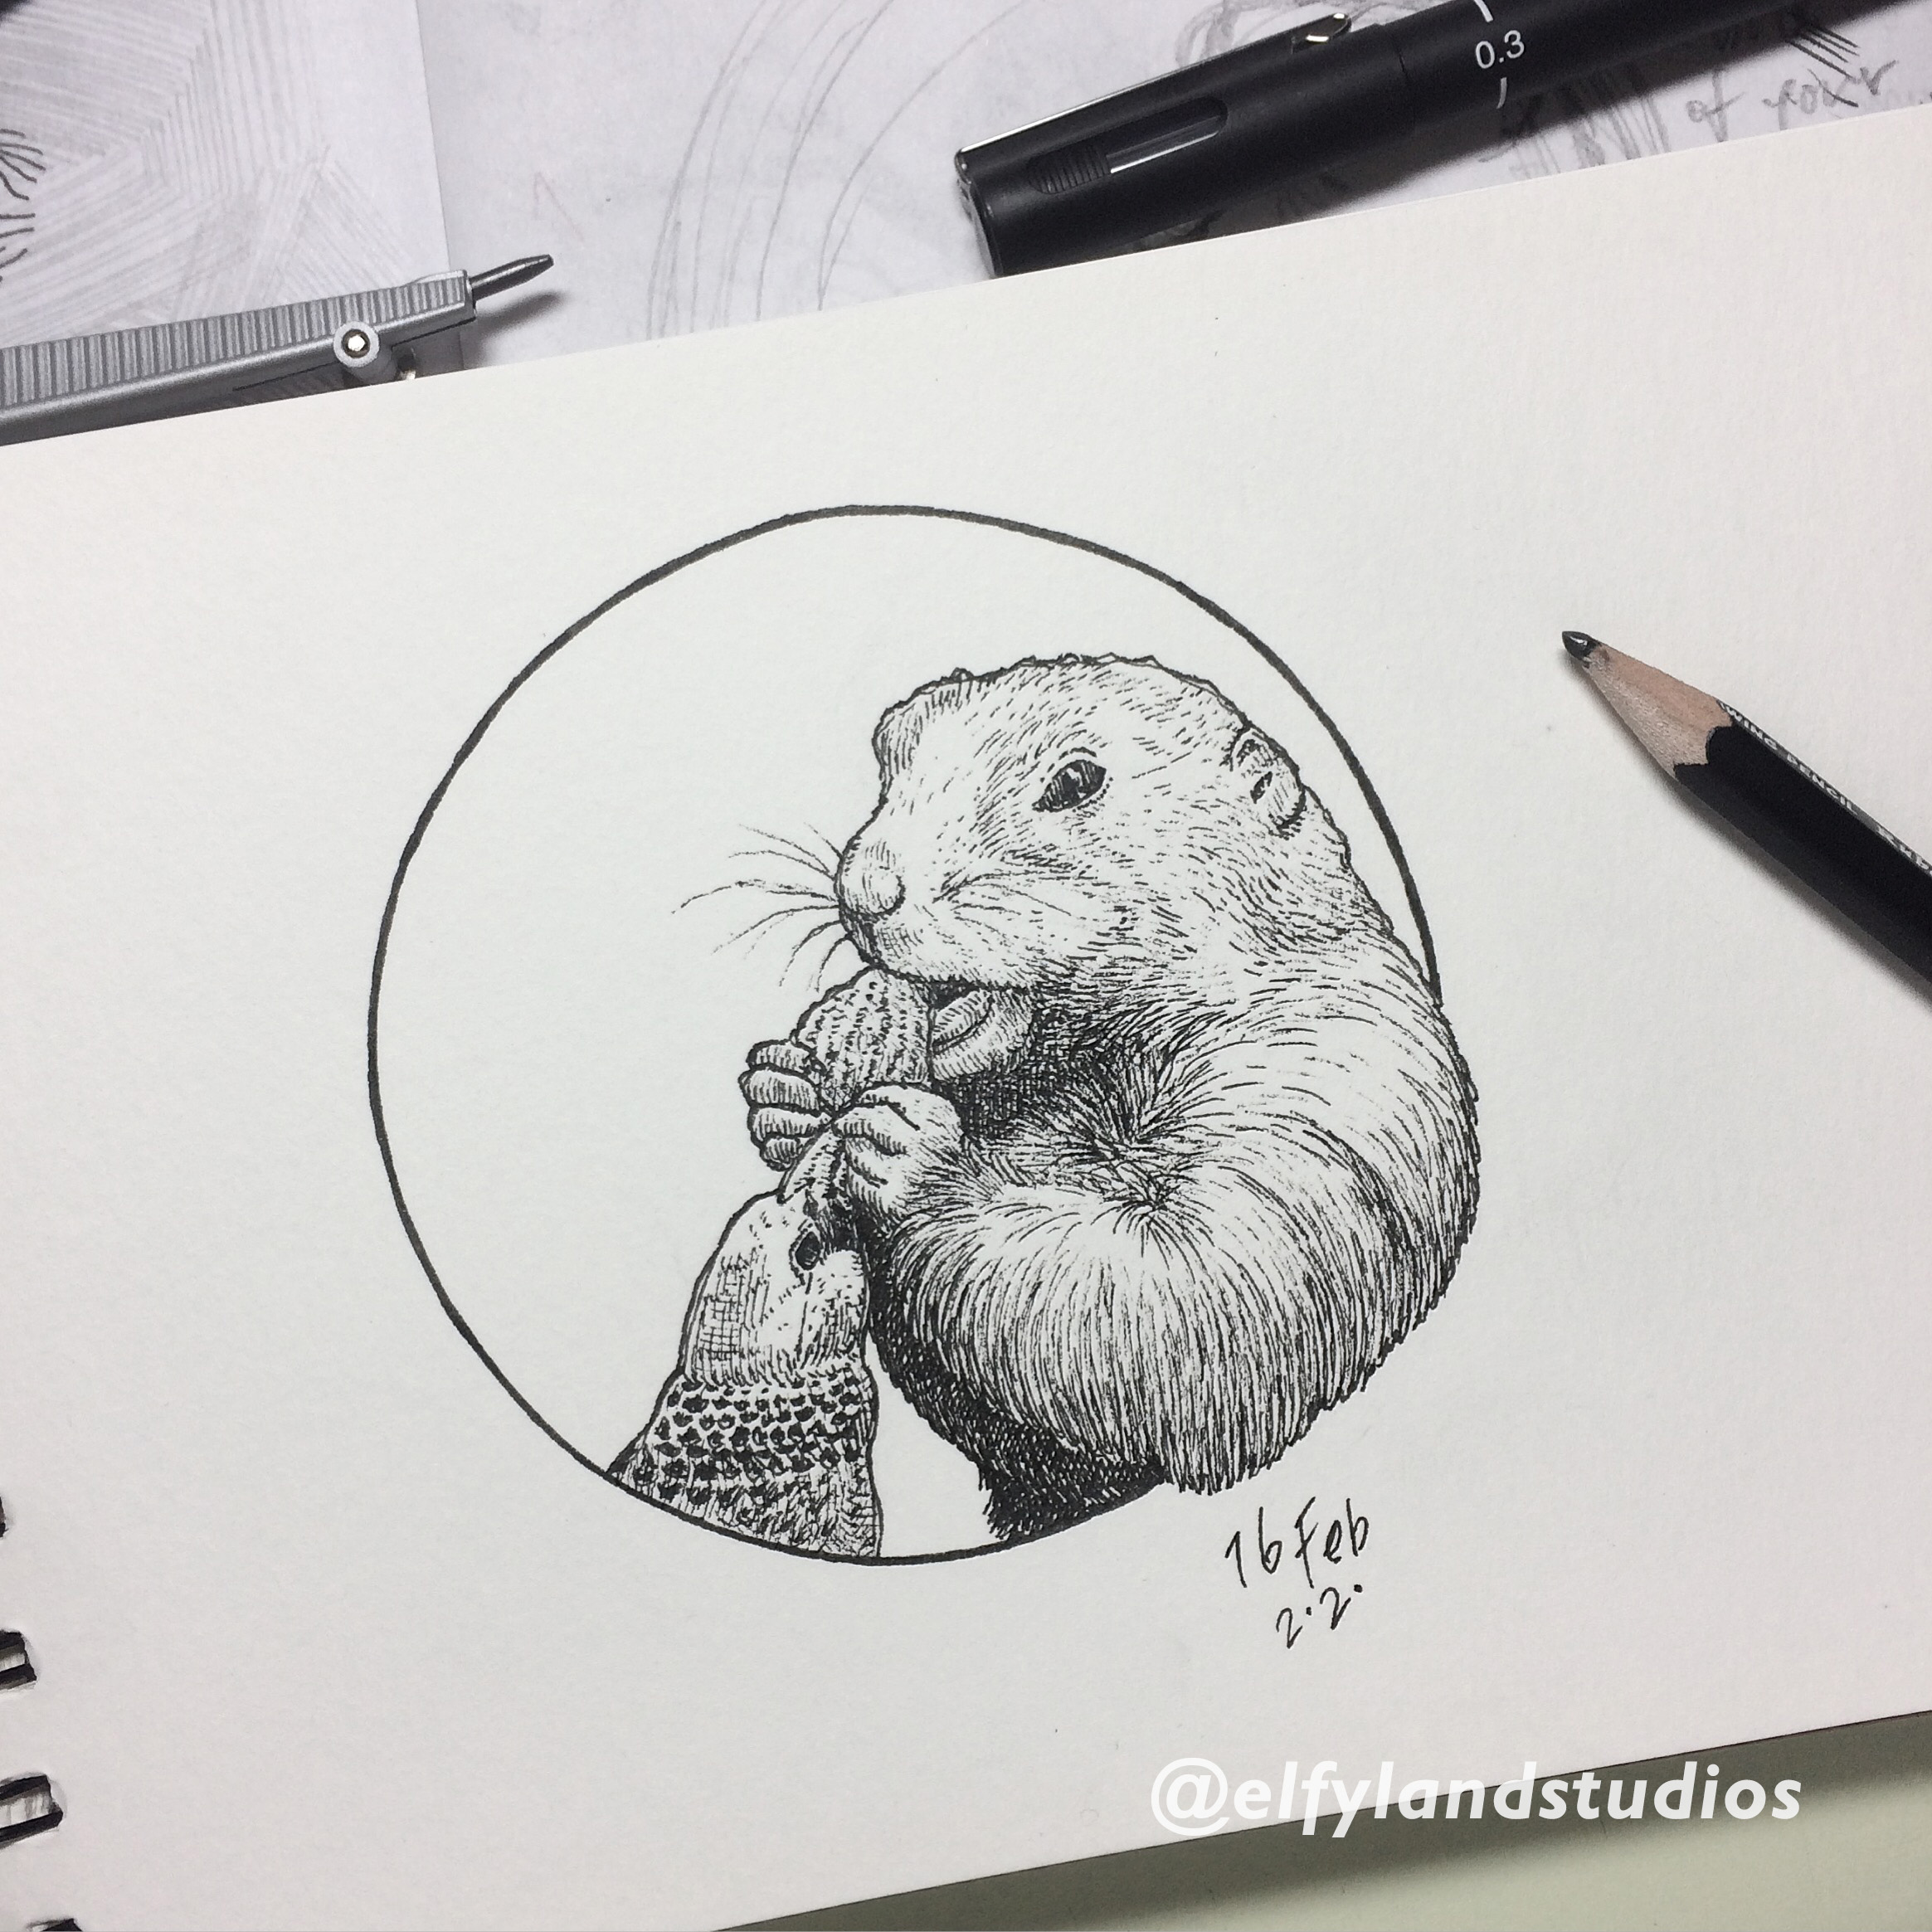 Ink drawing of a beaver showing cross hatching techniques in ink